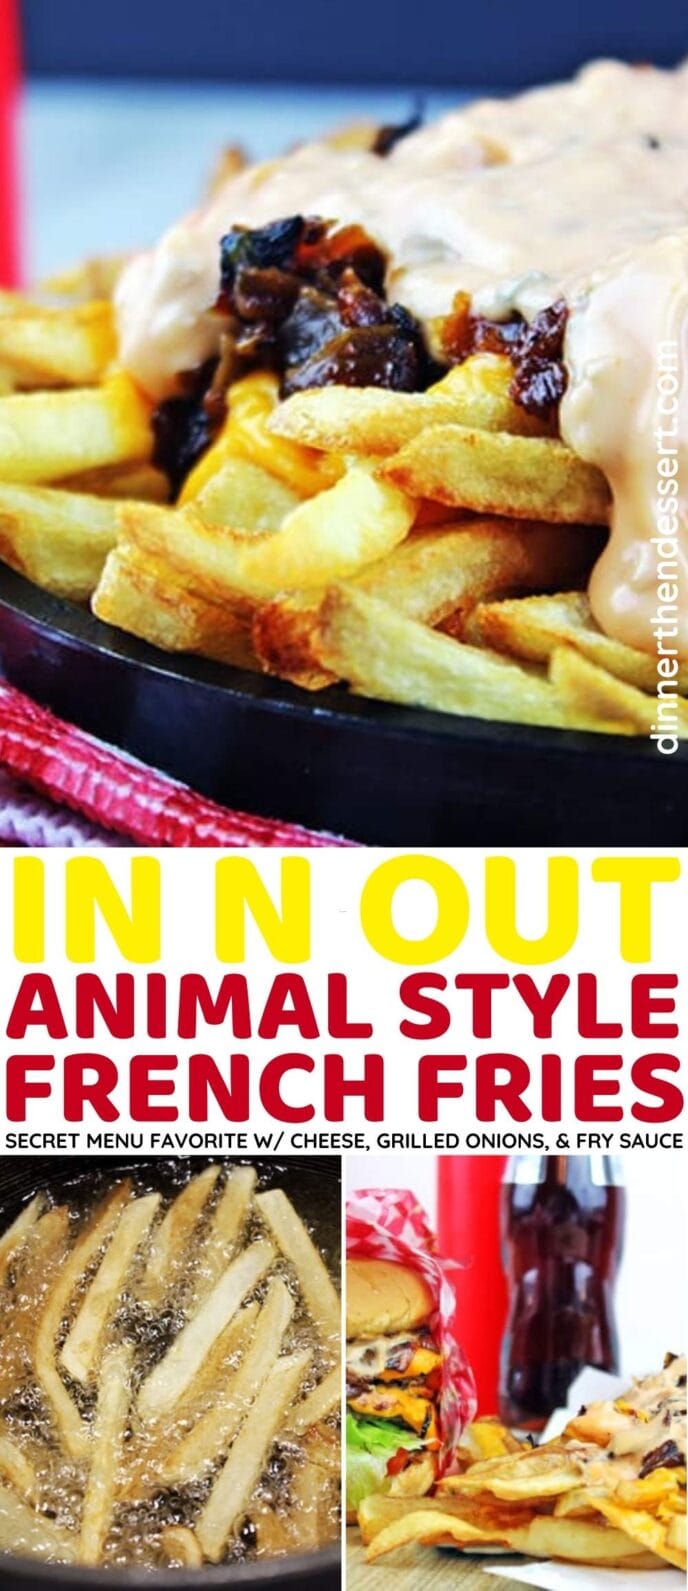 In n Out Animal Style French Fries Collage